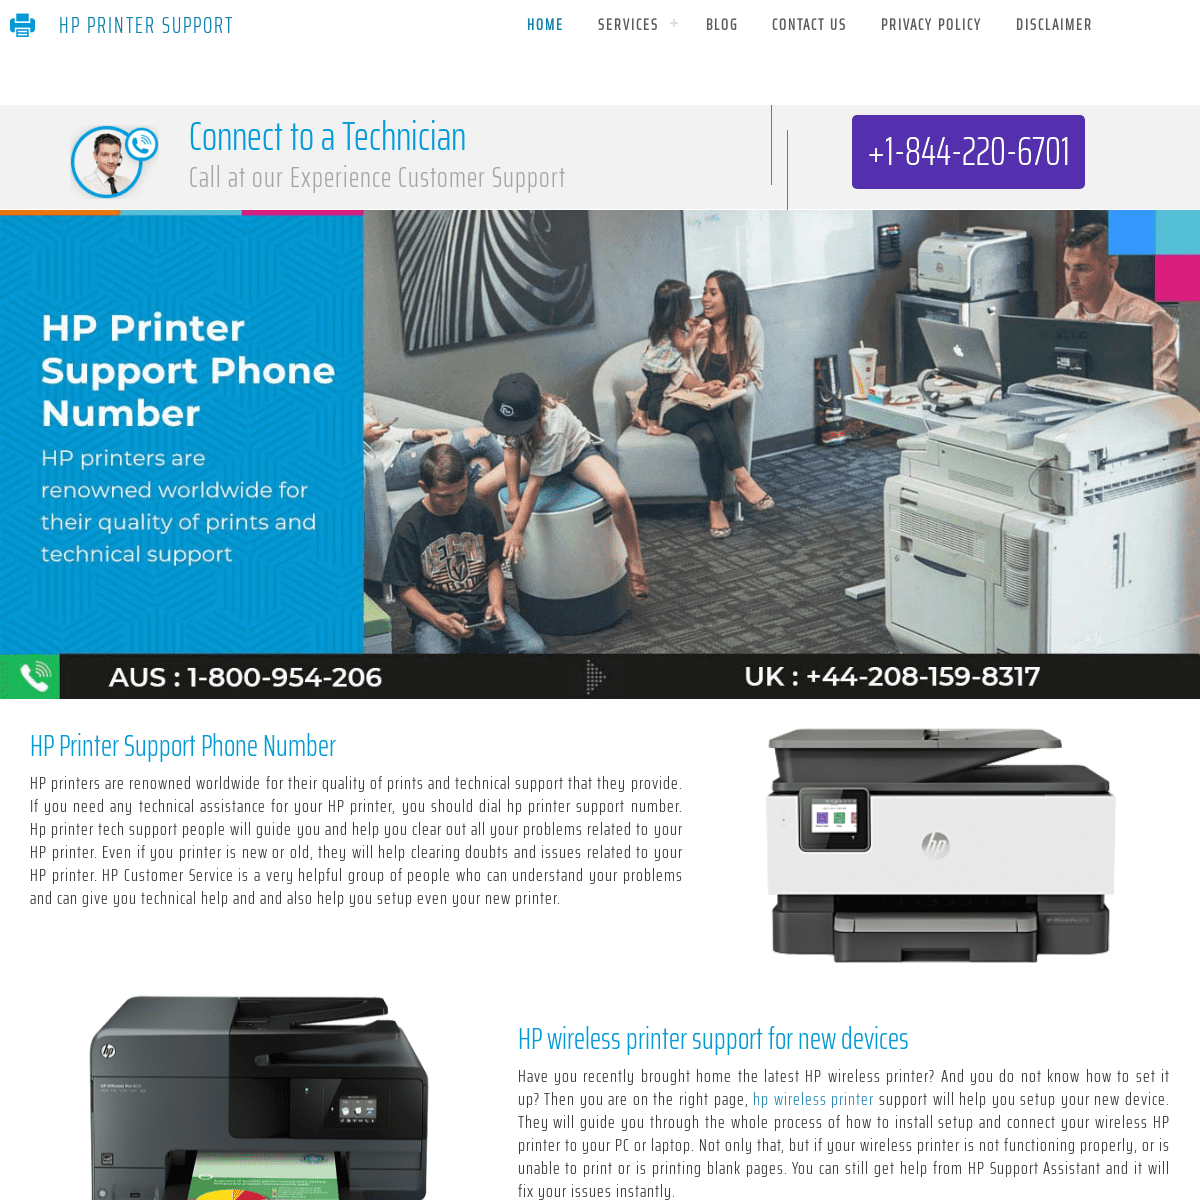 A complete backup of https://hp-printer-support.us